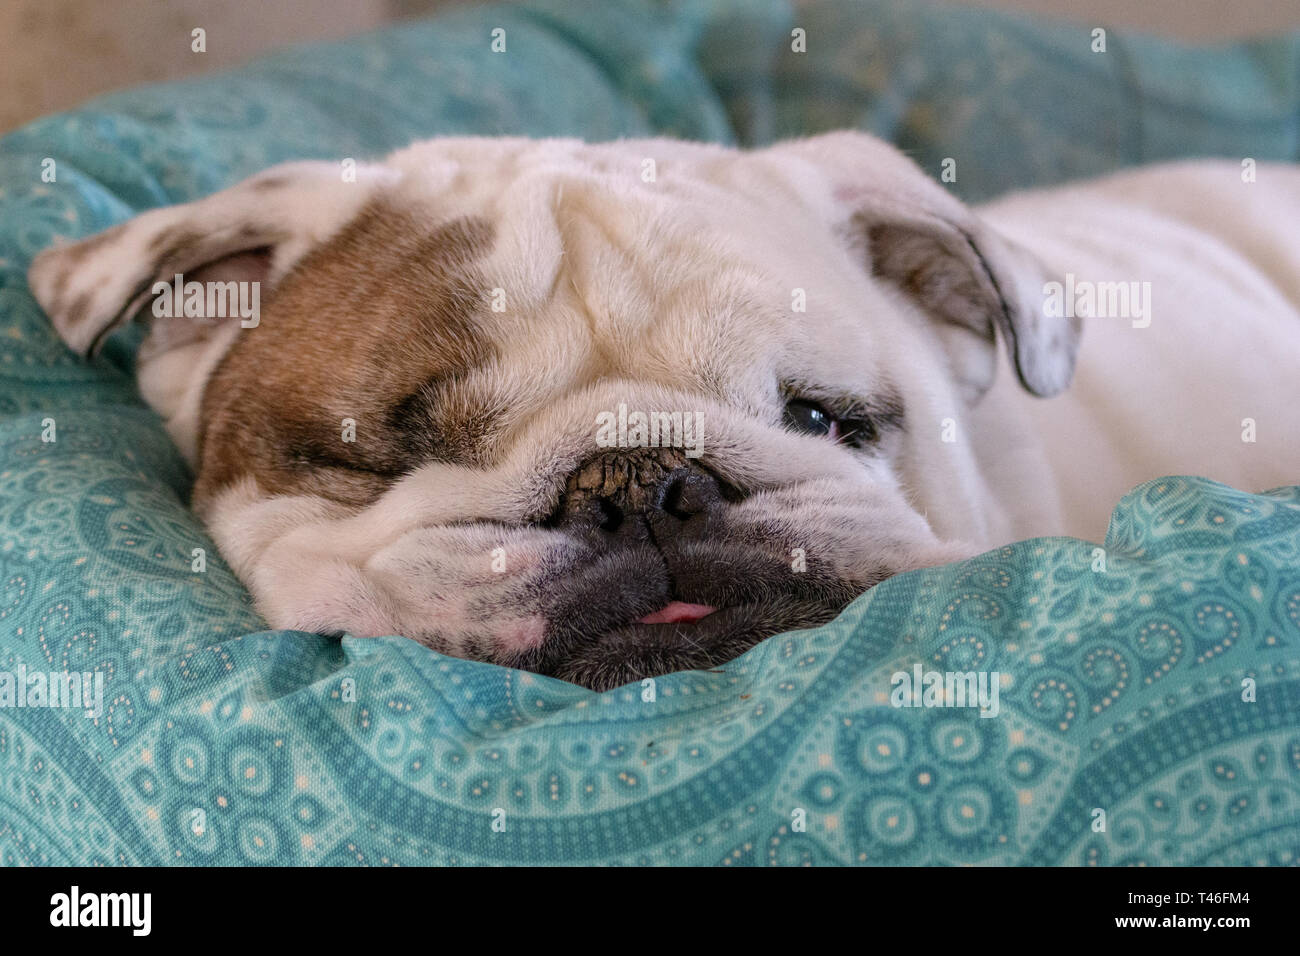 One eyed bulldog sleeping in a bed Stock Photo